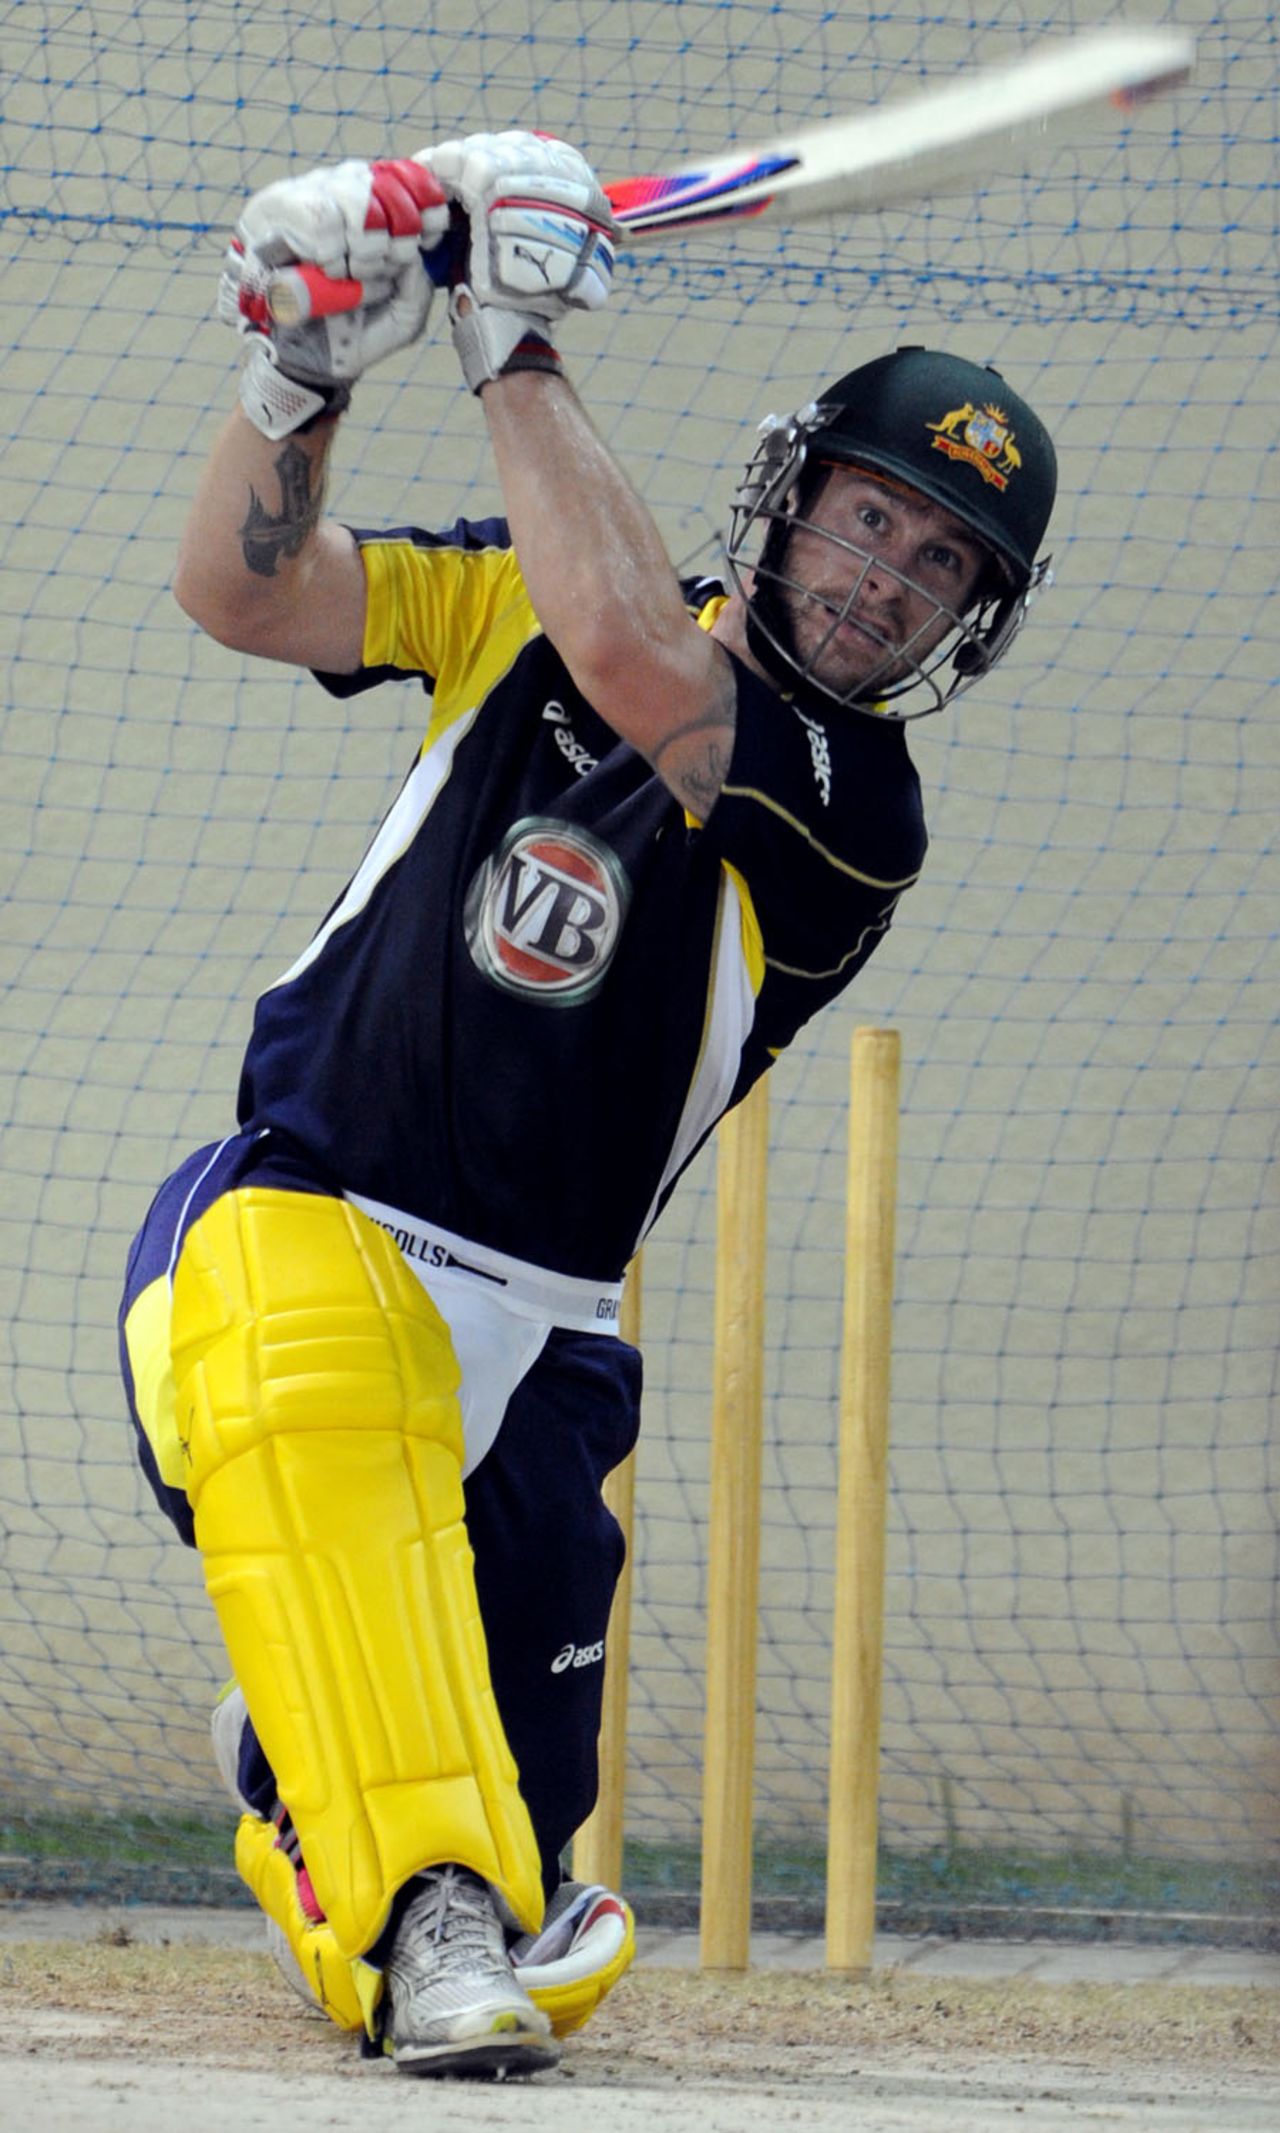 Matthew Wade bats during a training session, Sharjah, August 27, 2012